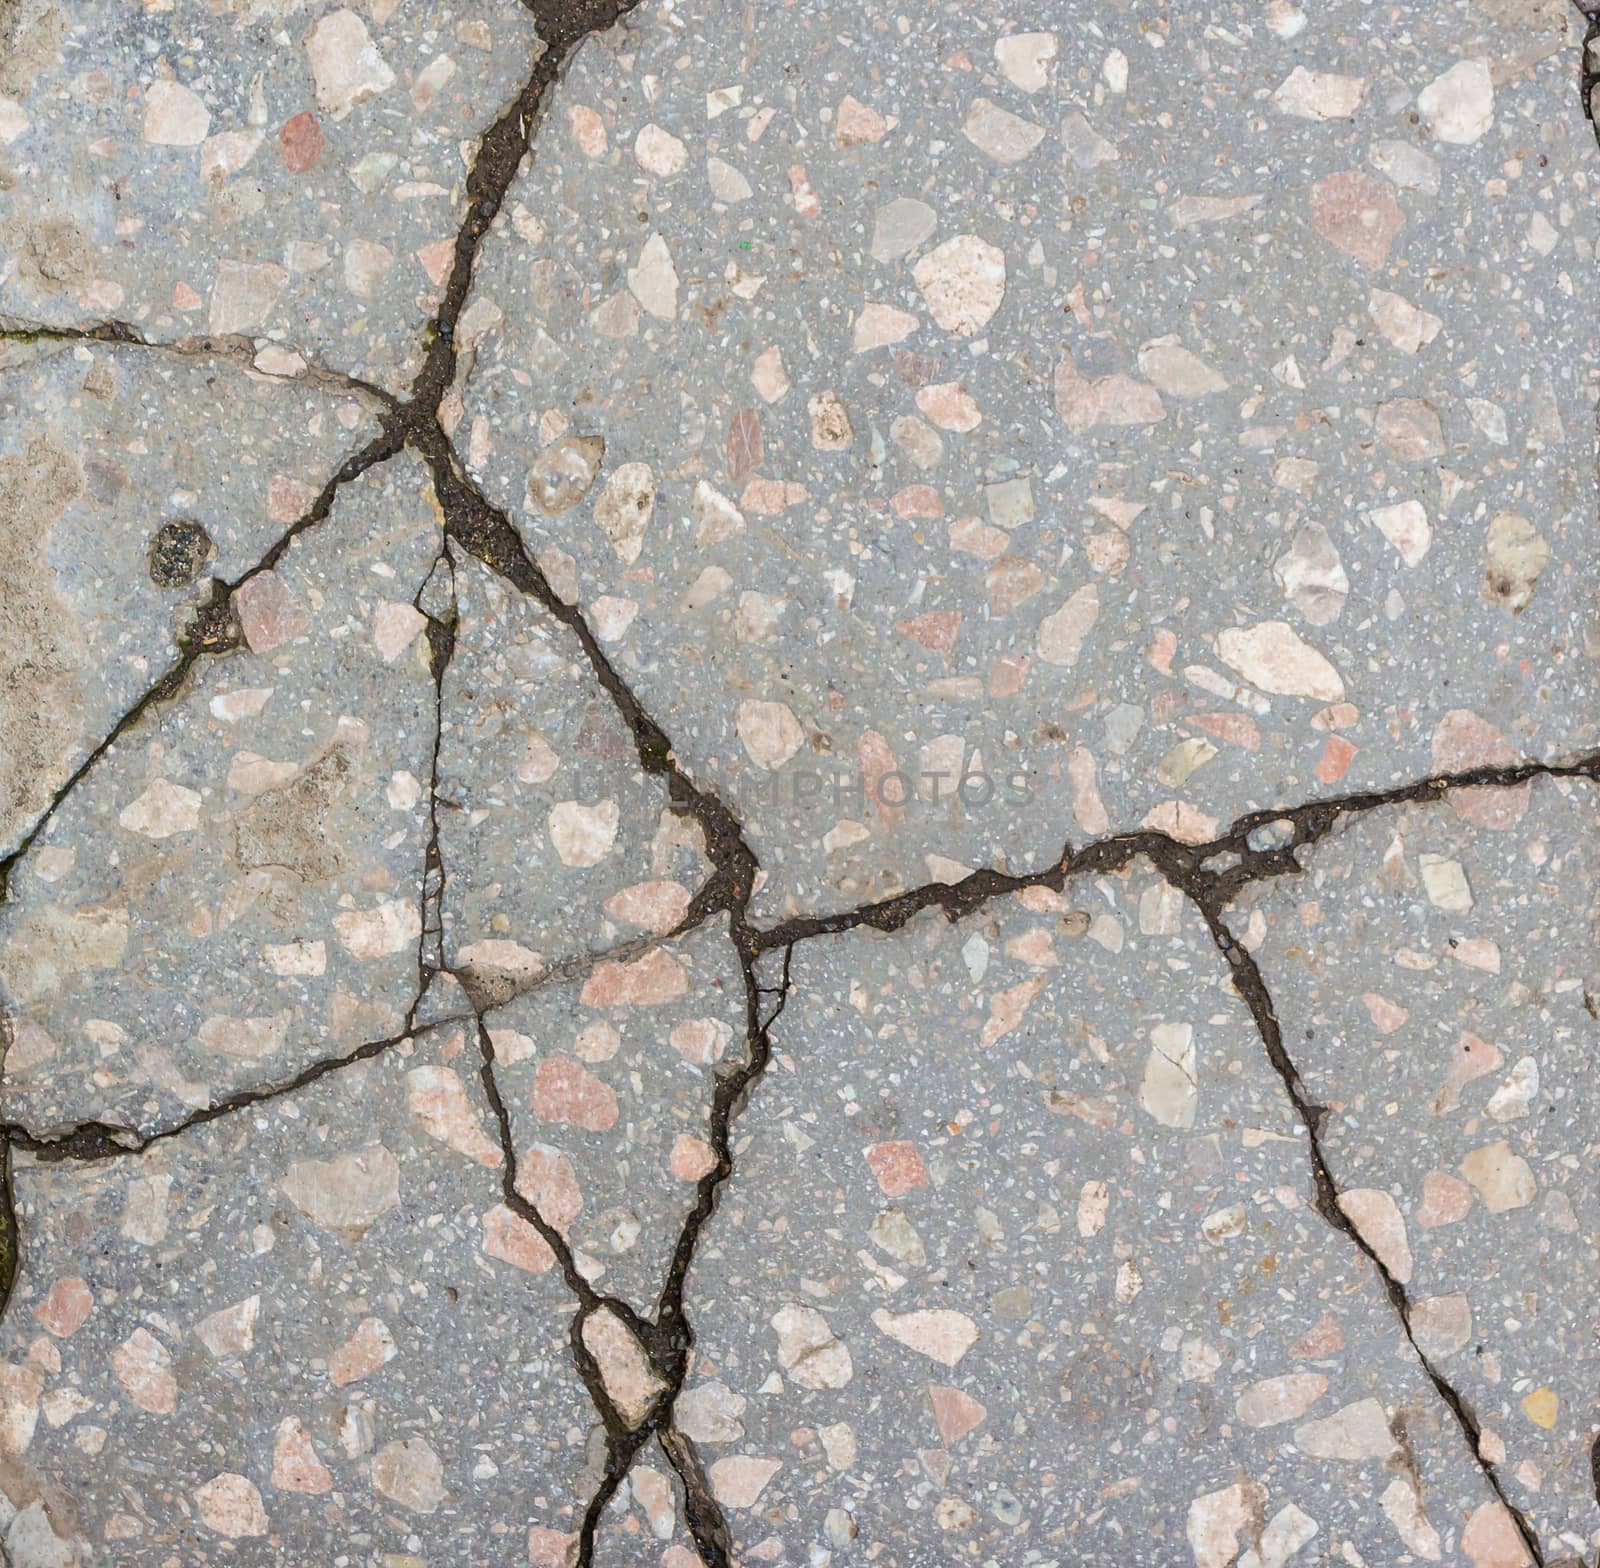 a large number of deep cracks and small scratches in surface of the concrete with granite interspersed